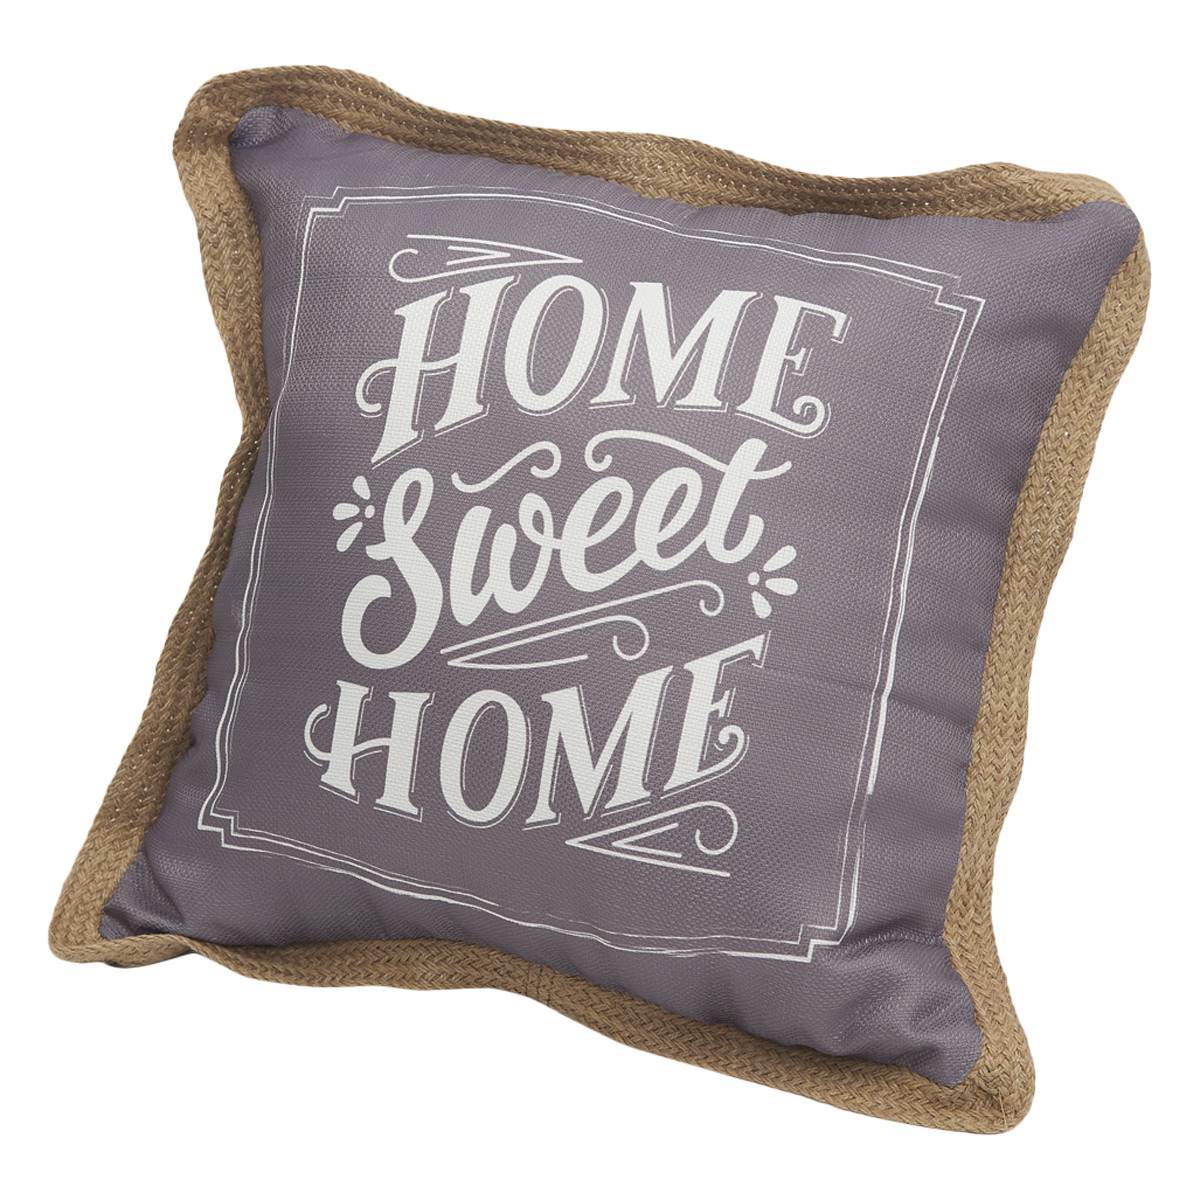 Home Sweet Home Decorative Pillow - 18x18